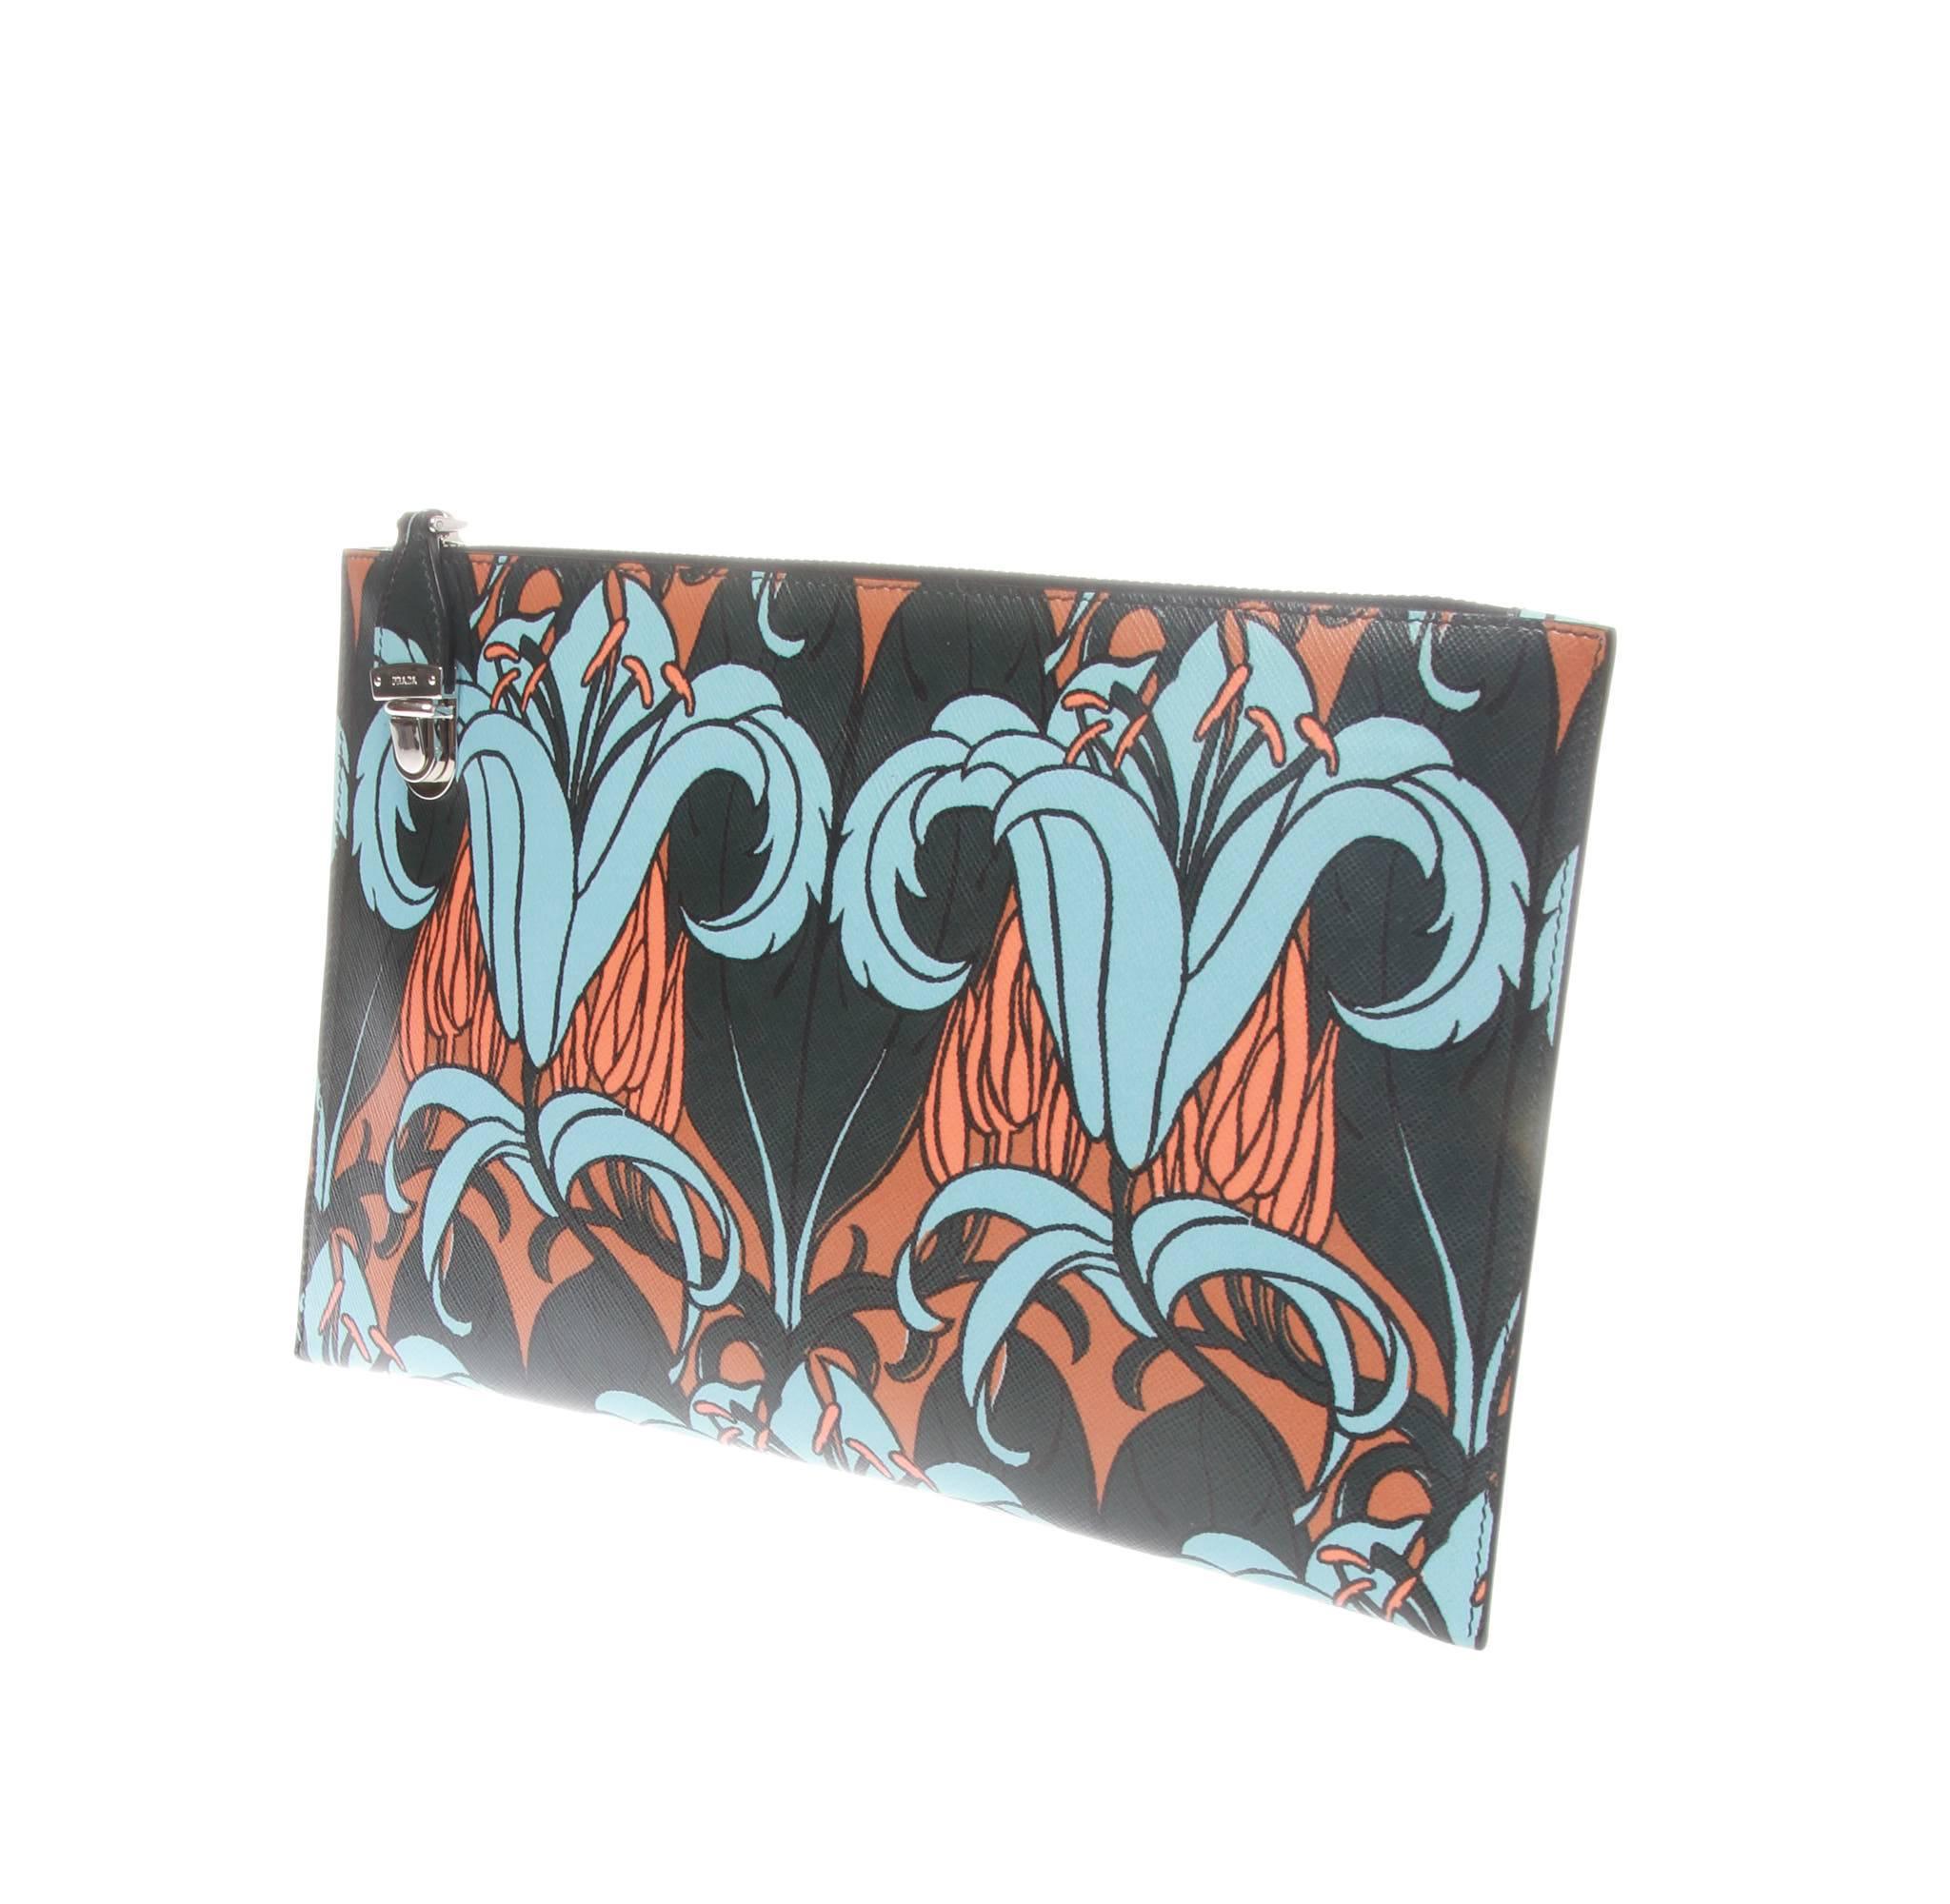 Prada leather pouch, clutch or document holder featuring a lily print graphic. One main compartment with zip at top and and push lock closure/security mechanism. Handheld strap at back. 

Comes with box and dustbag.